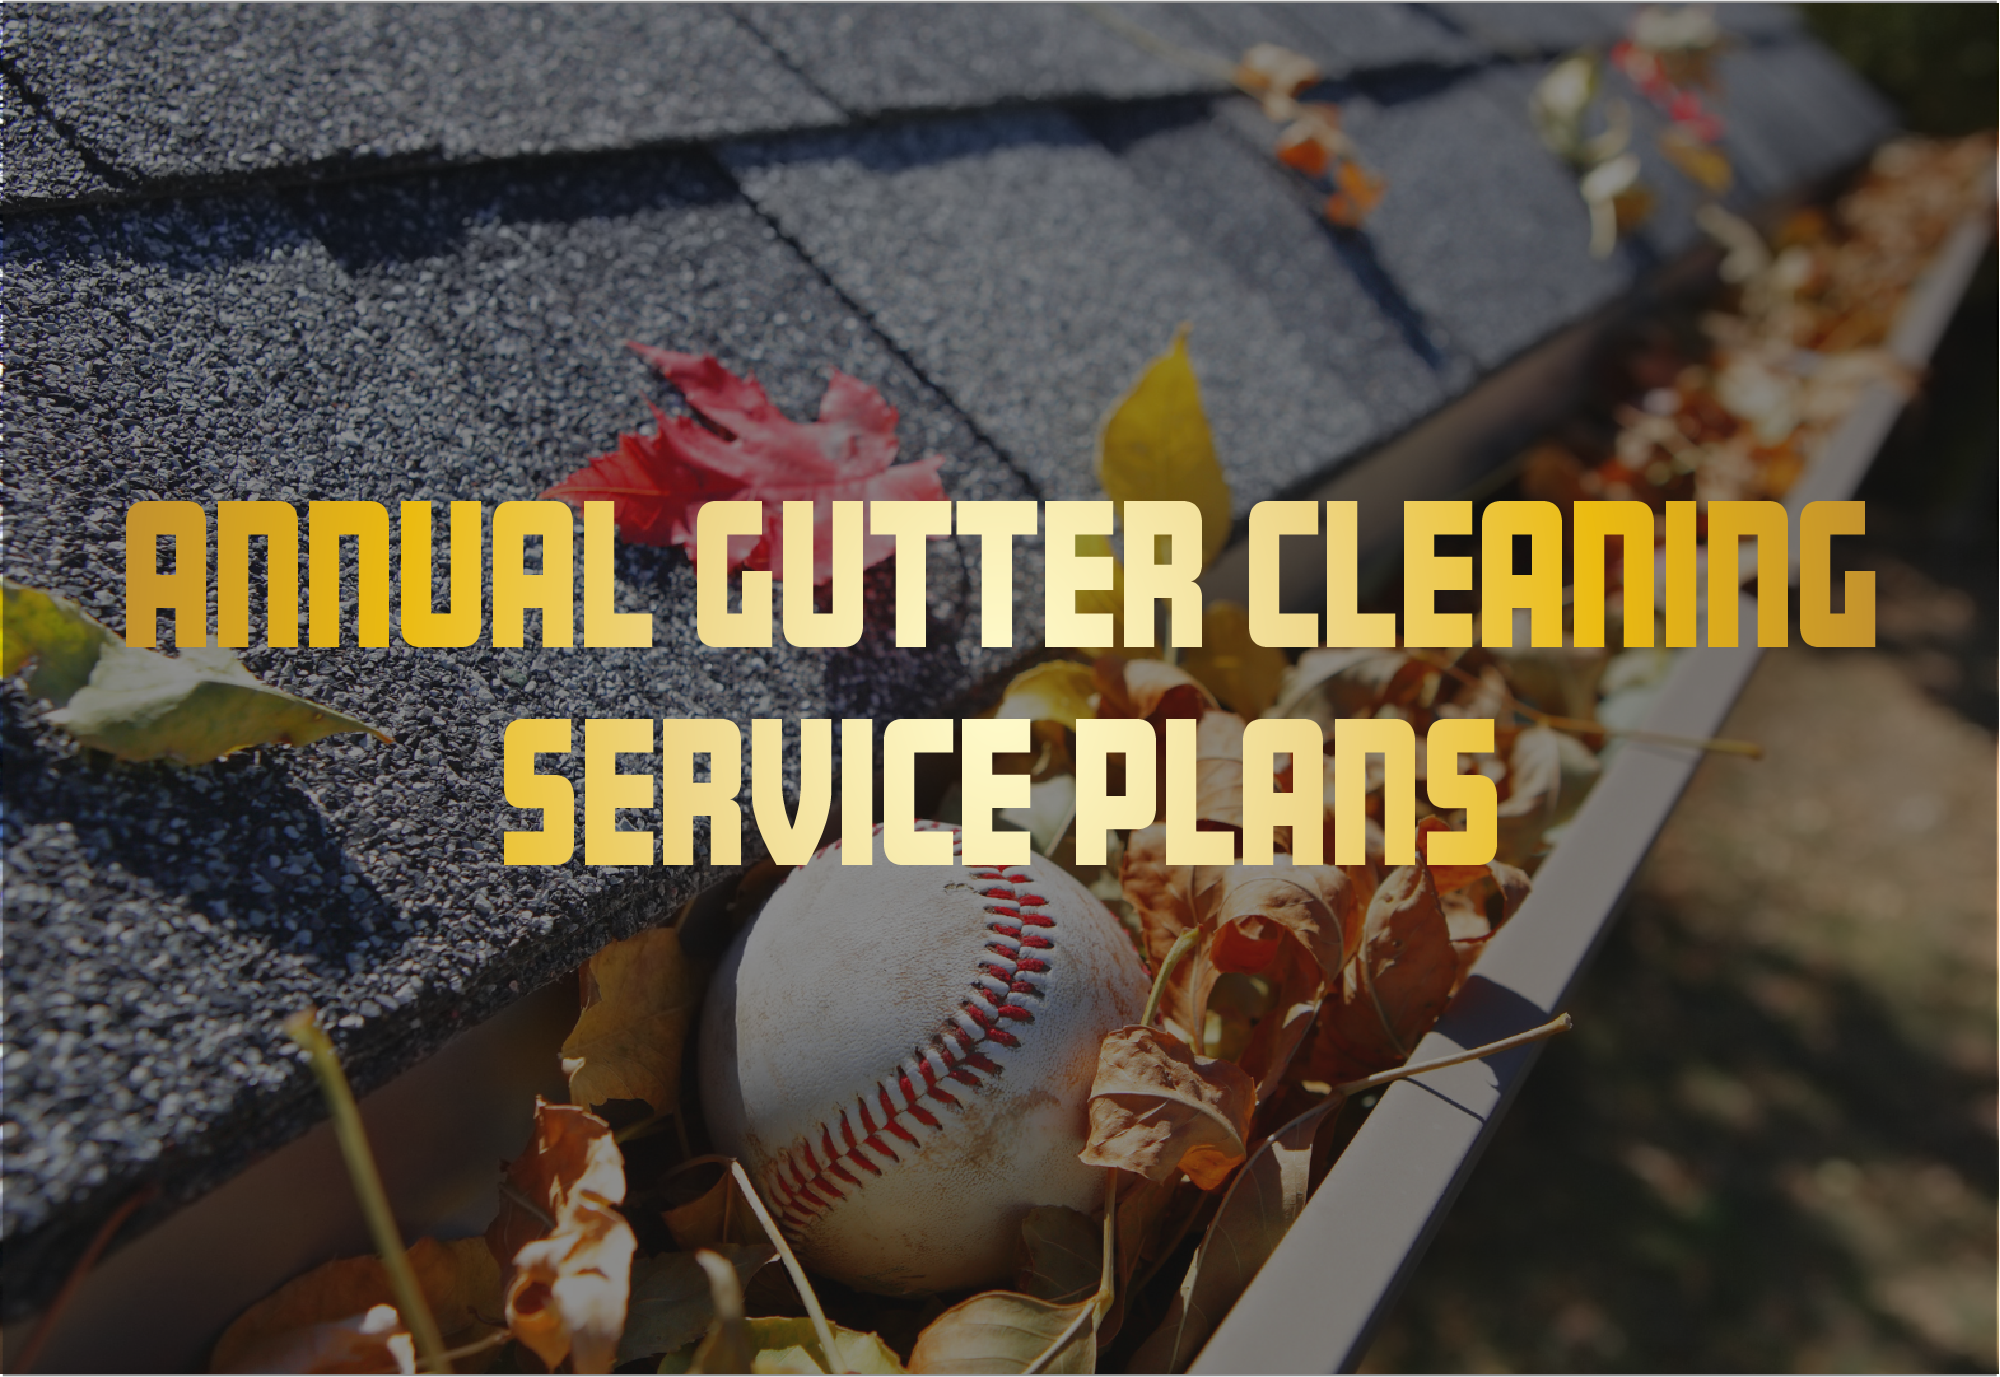 annual gutter cleaning service plans page link image